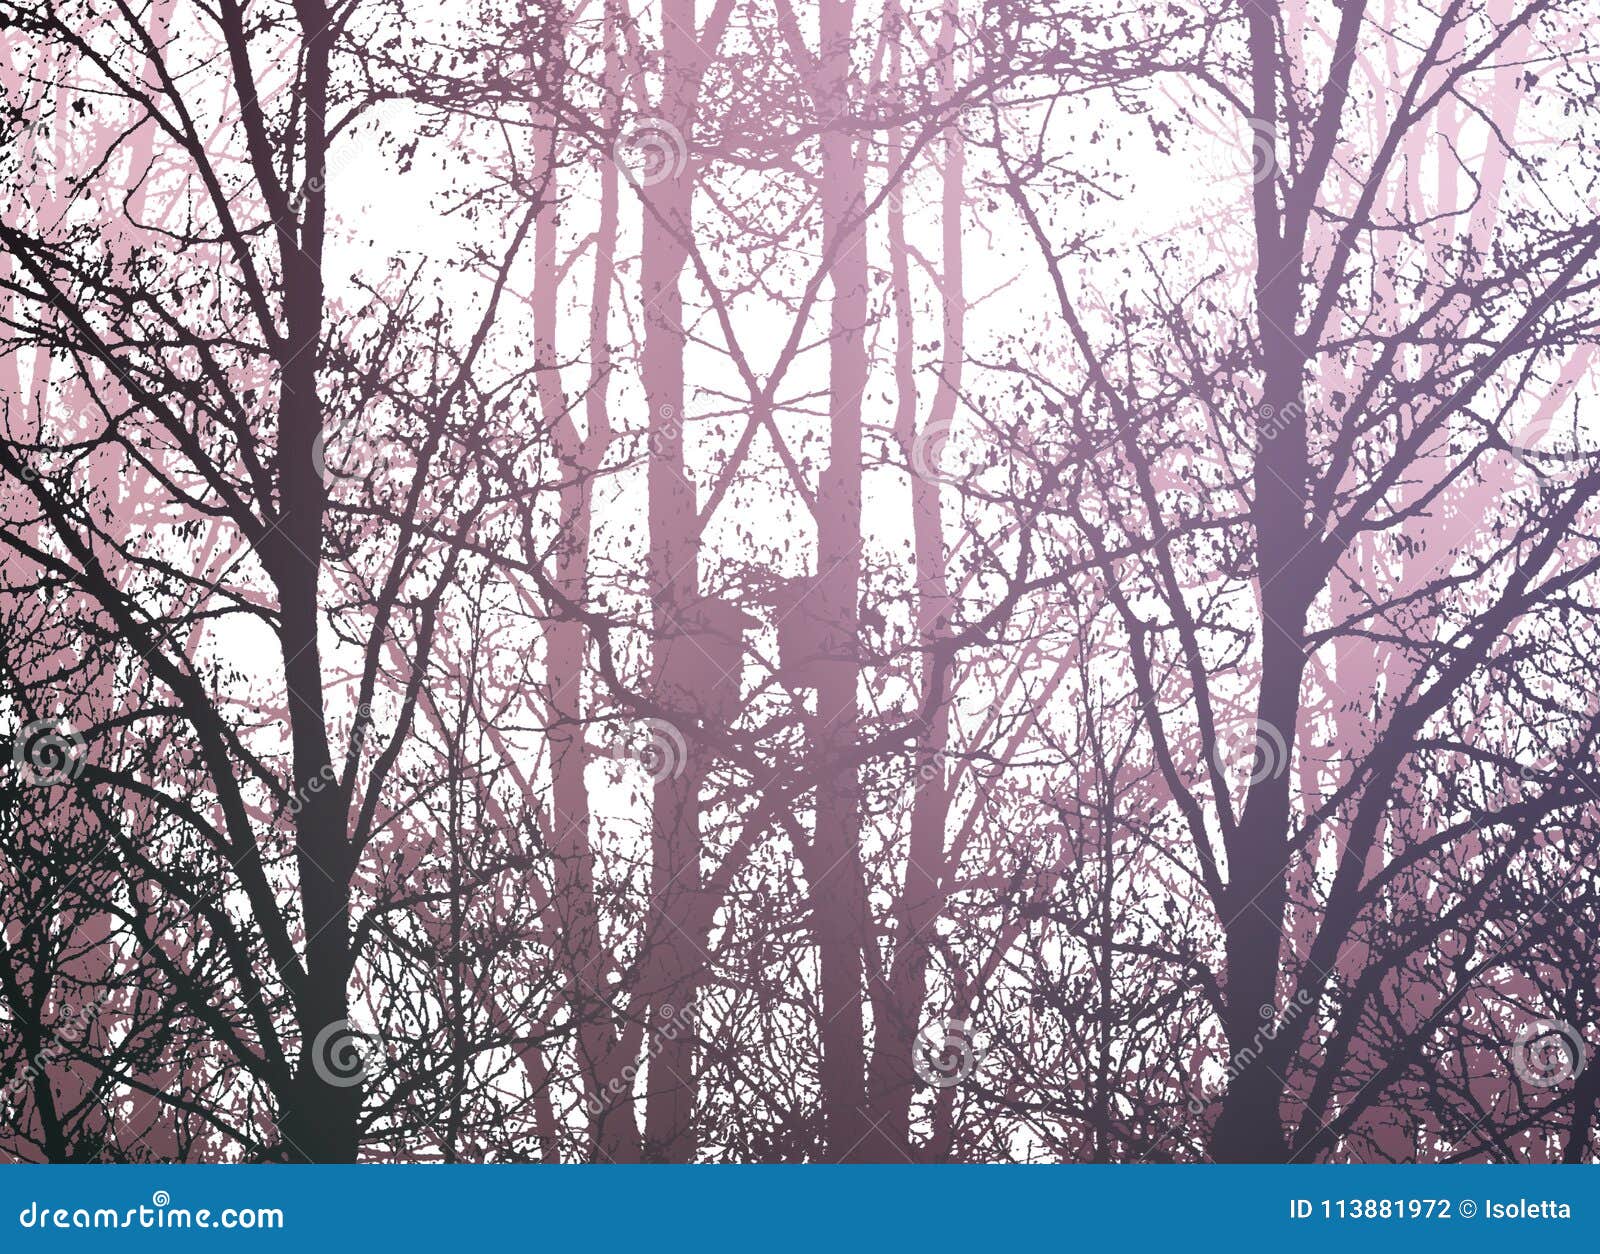 Silhouettes of bare trees stock photo. Image of spring - 113881972